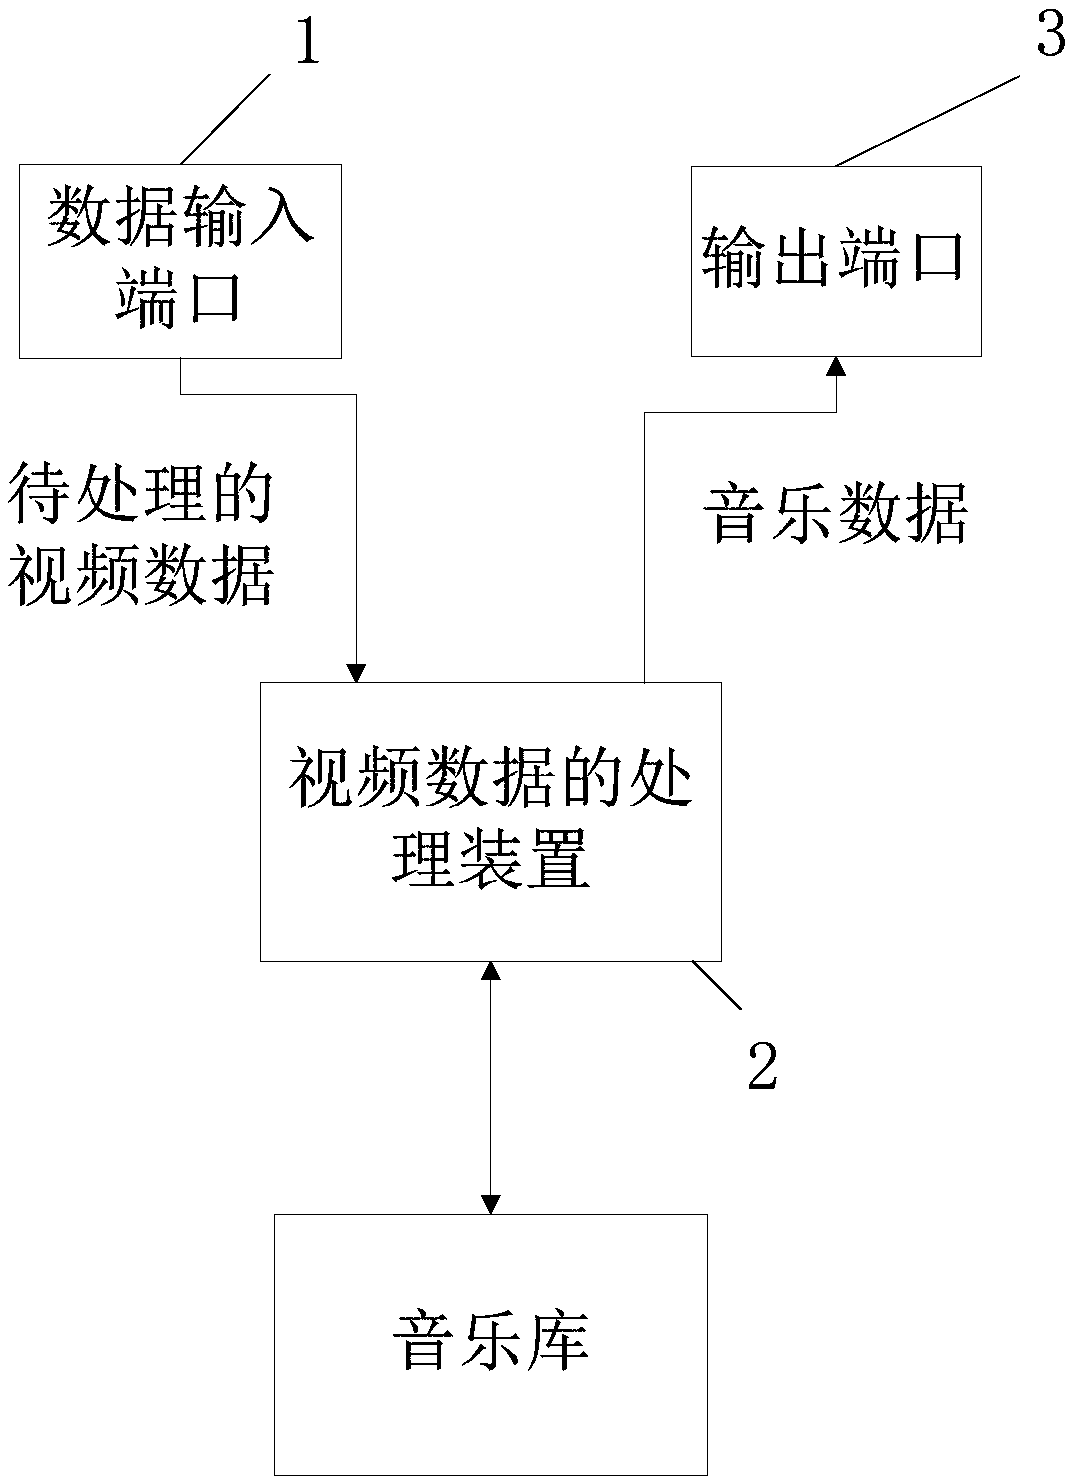 Video data processing method and device and readable storage medium